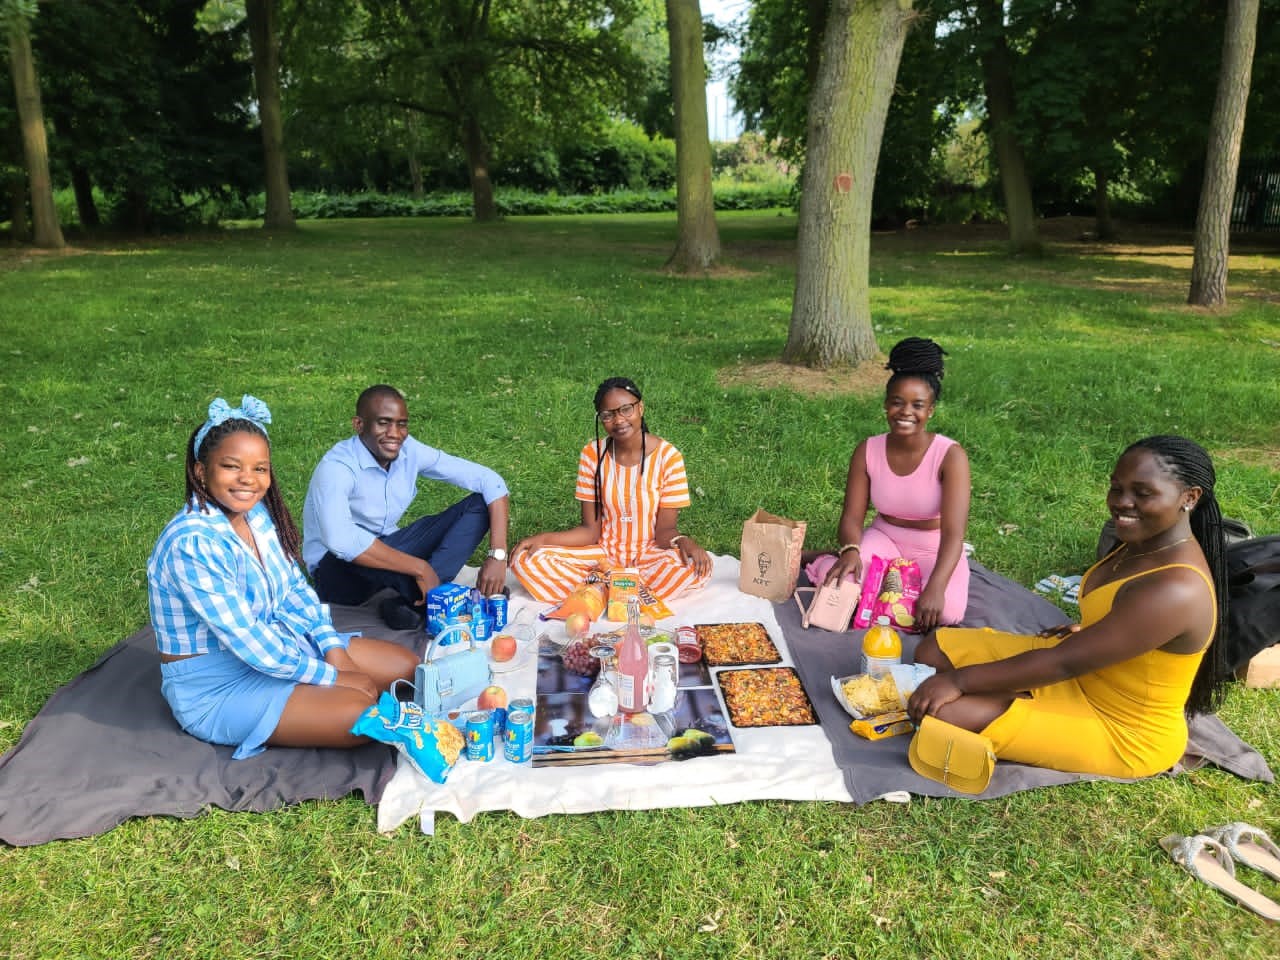 Some of the Makerere University Students at the picnic at Walloton Park in Nottingham City.